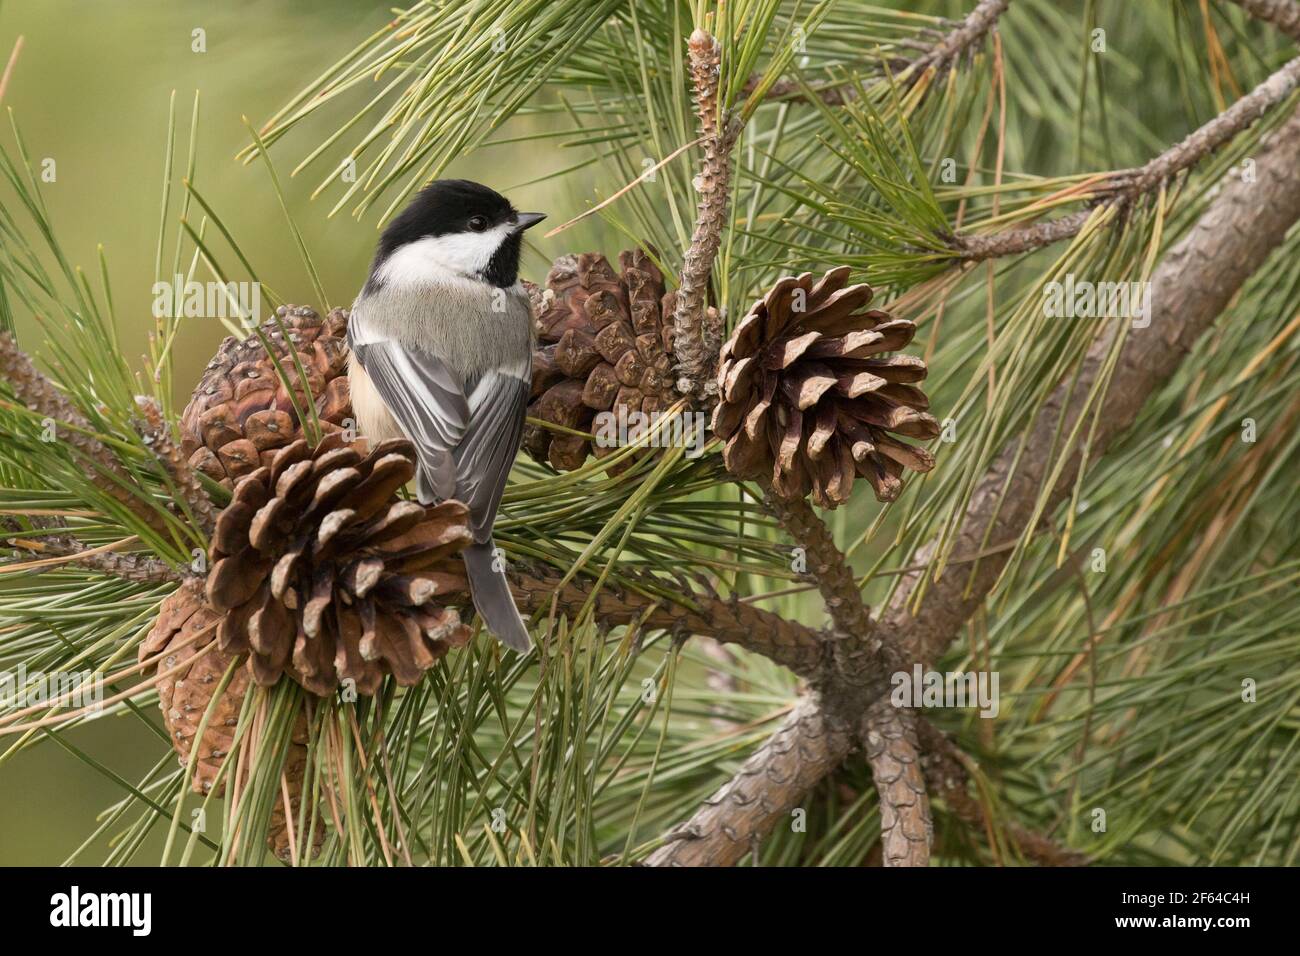 Black-capped Chickadee (Poecile atricapillus) perched in a pine tree with pine cones, Long Island, New York Stock Photo